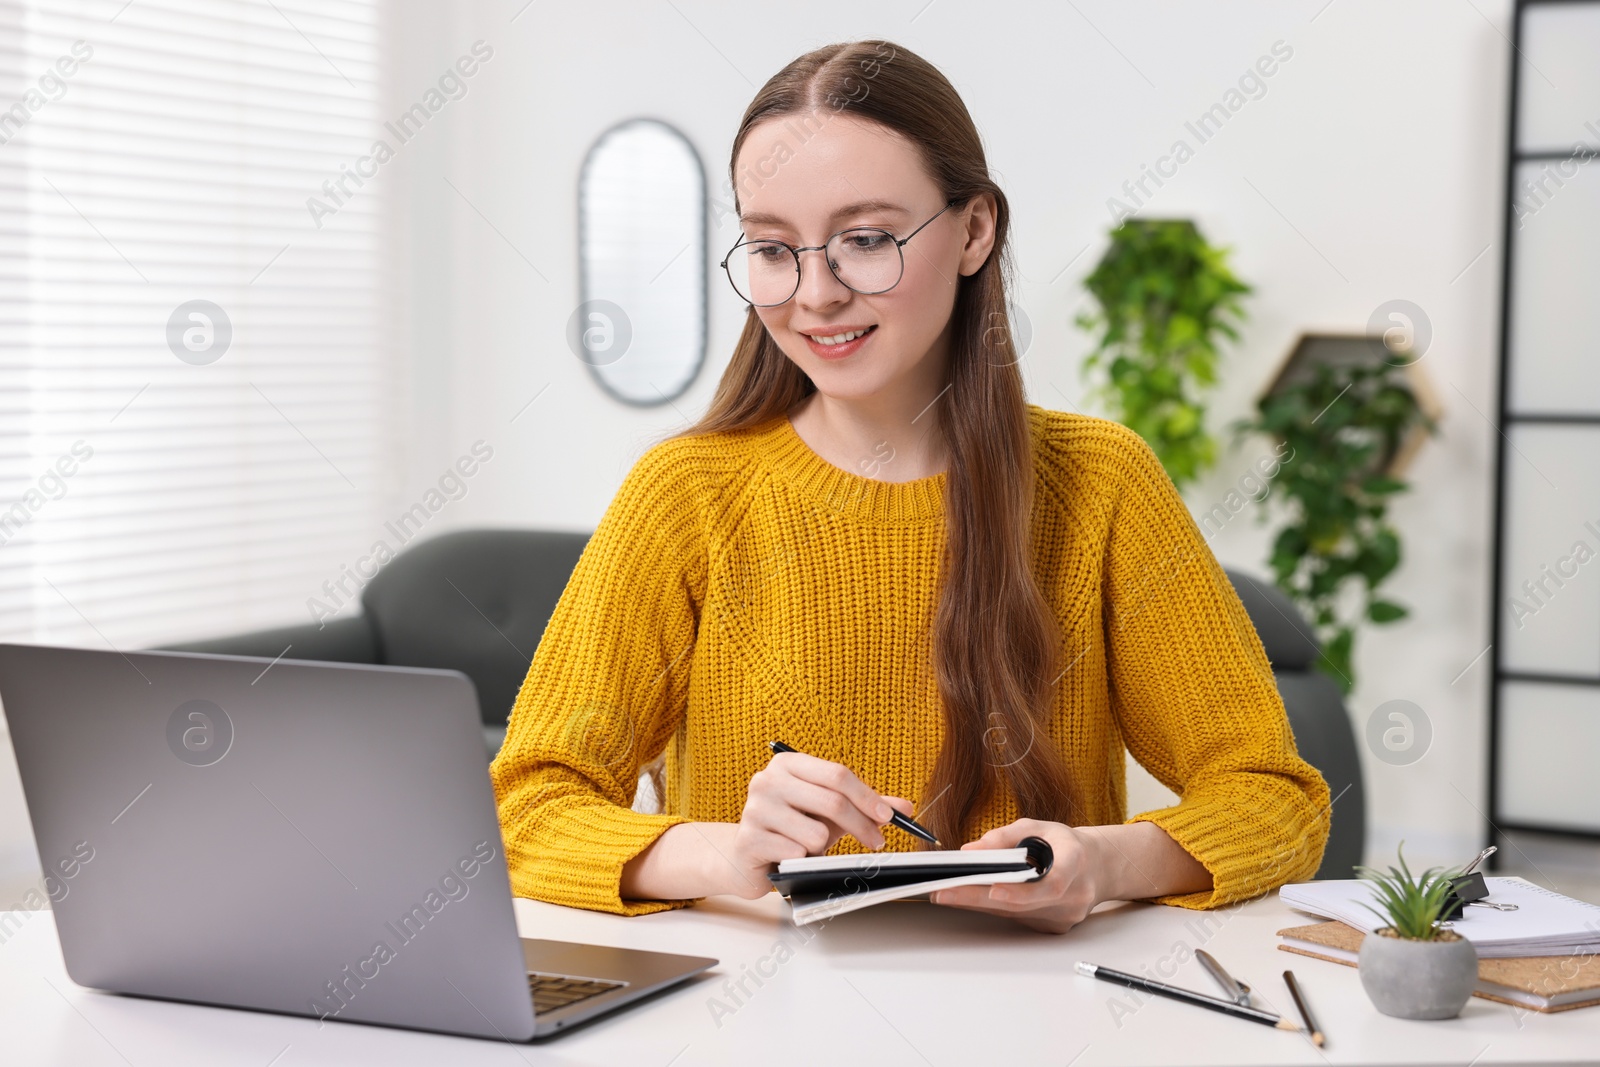 Photo of E-learning. Young woman taking notes during online lesson at white table indoors